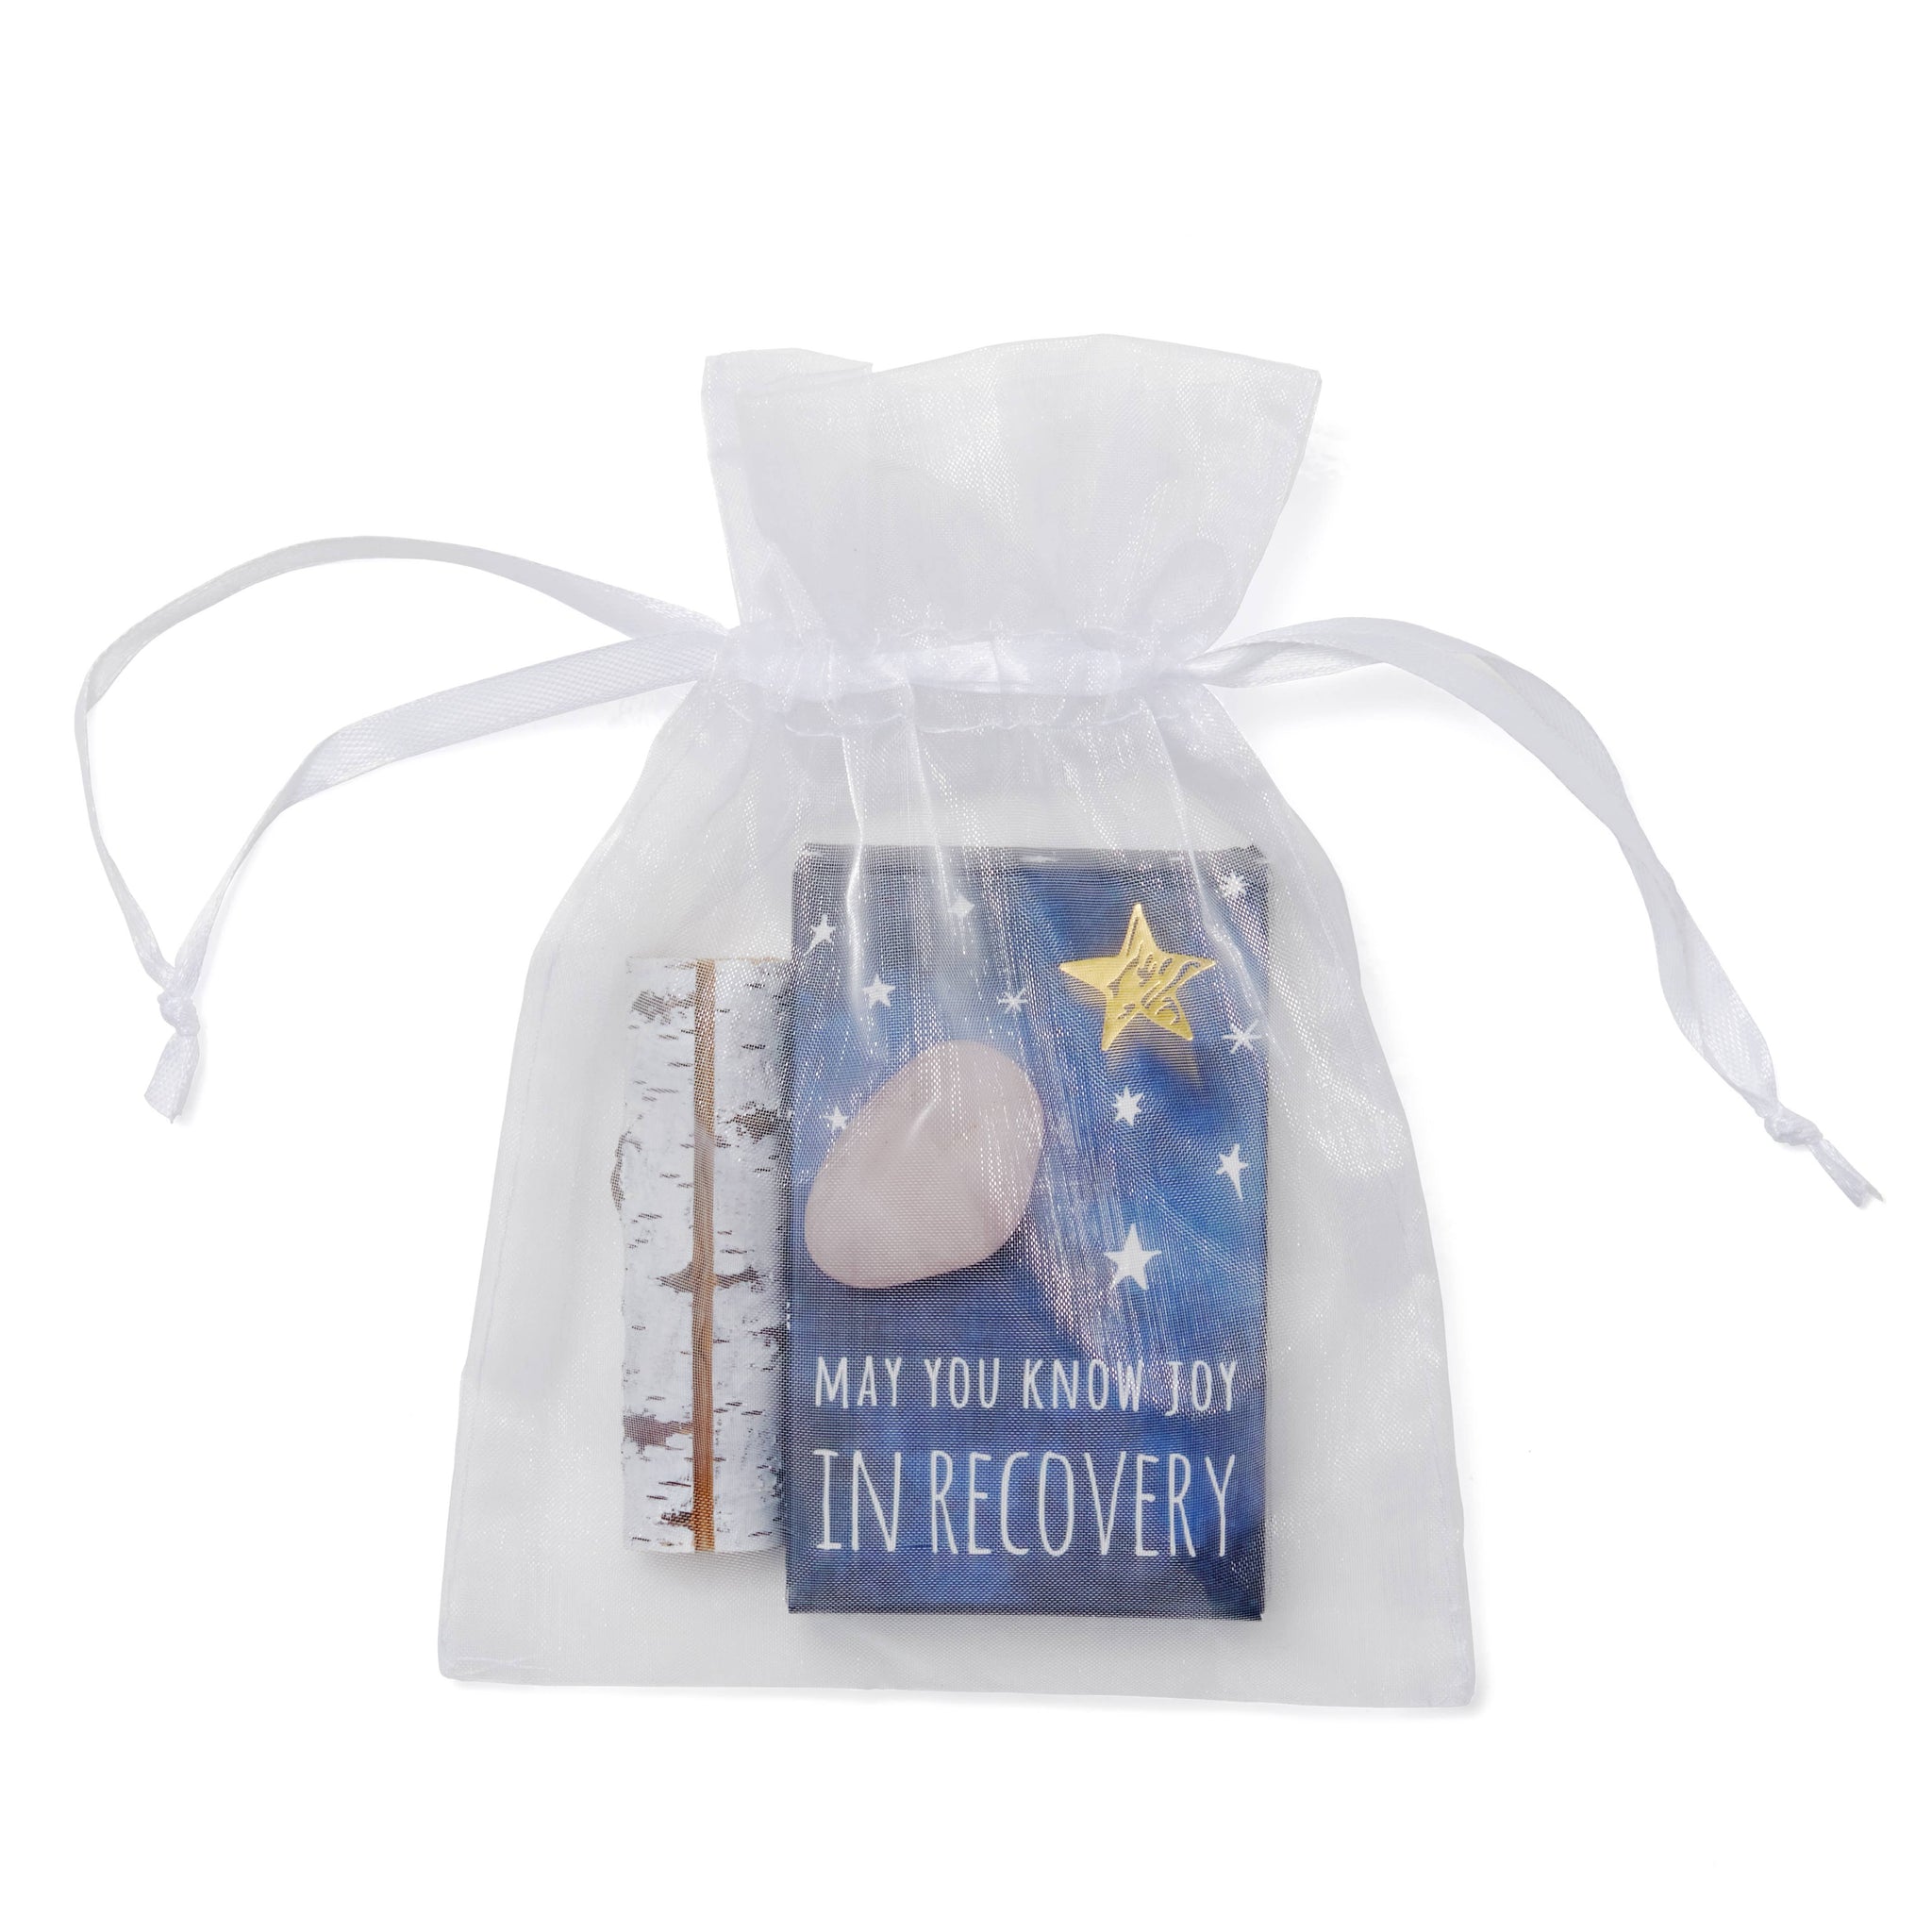 May You Know Joy IN RECOVERY- Intention Card Ritual Gift Set